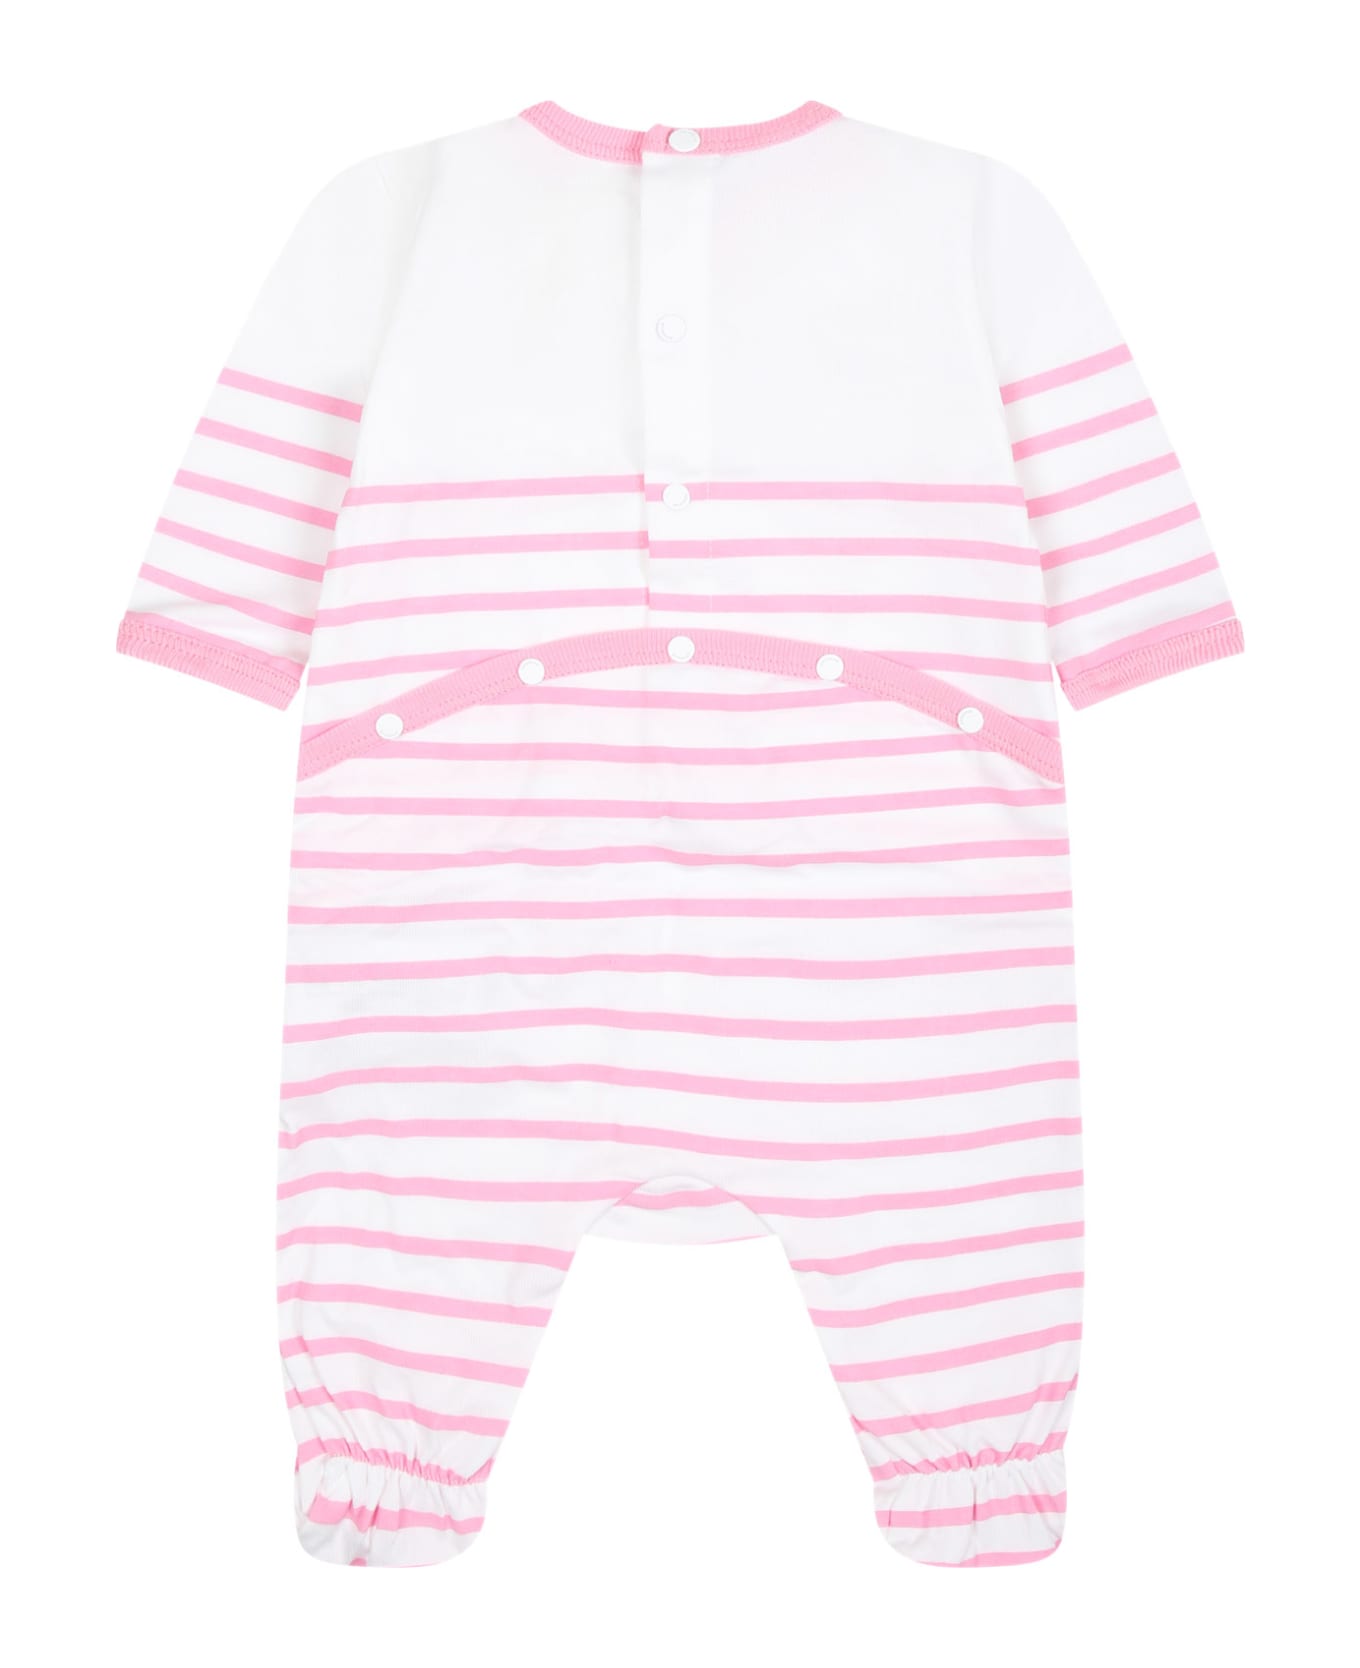 Givenchy Pink Set For Baby Girl With Logo Stripes - Rosa ボディスーツ＆セットアップ